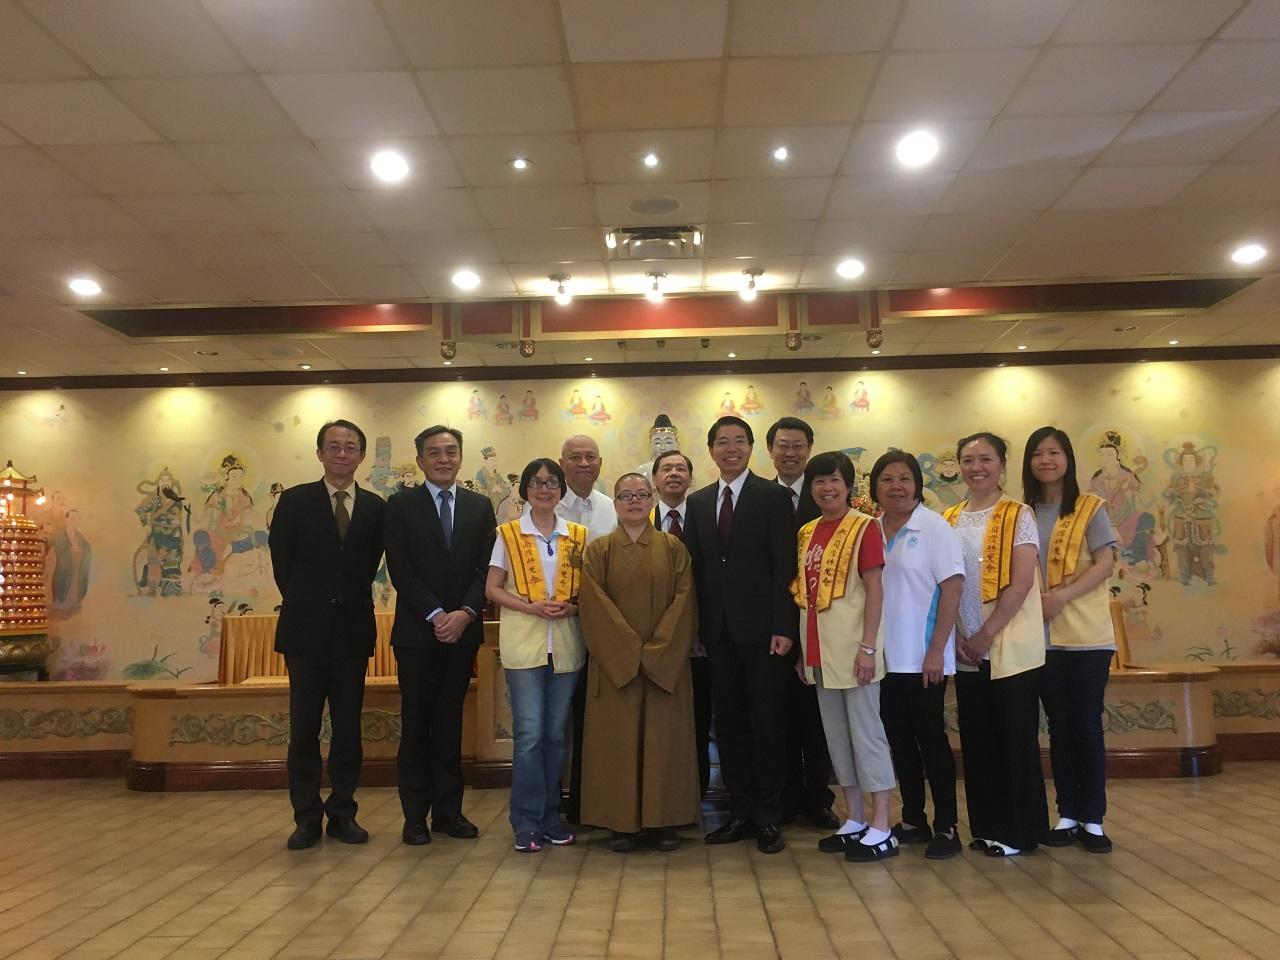 Representative Winston Wen-yi Chen of the Taipei Economic and Cultural Office in Canada (TECO) was warmly welcomed by the overseas Chinese and Taiwanese communities in Montreal on July 8, 2018   5/5